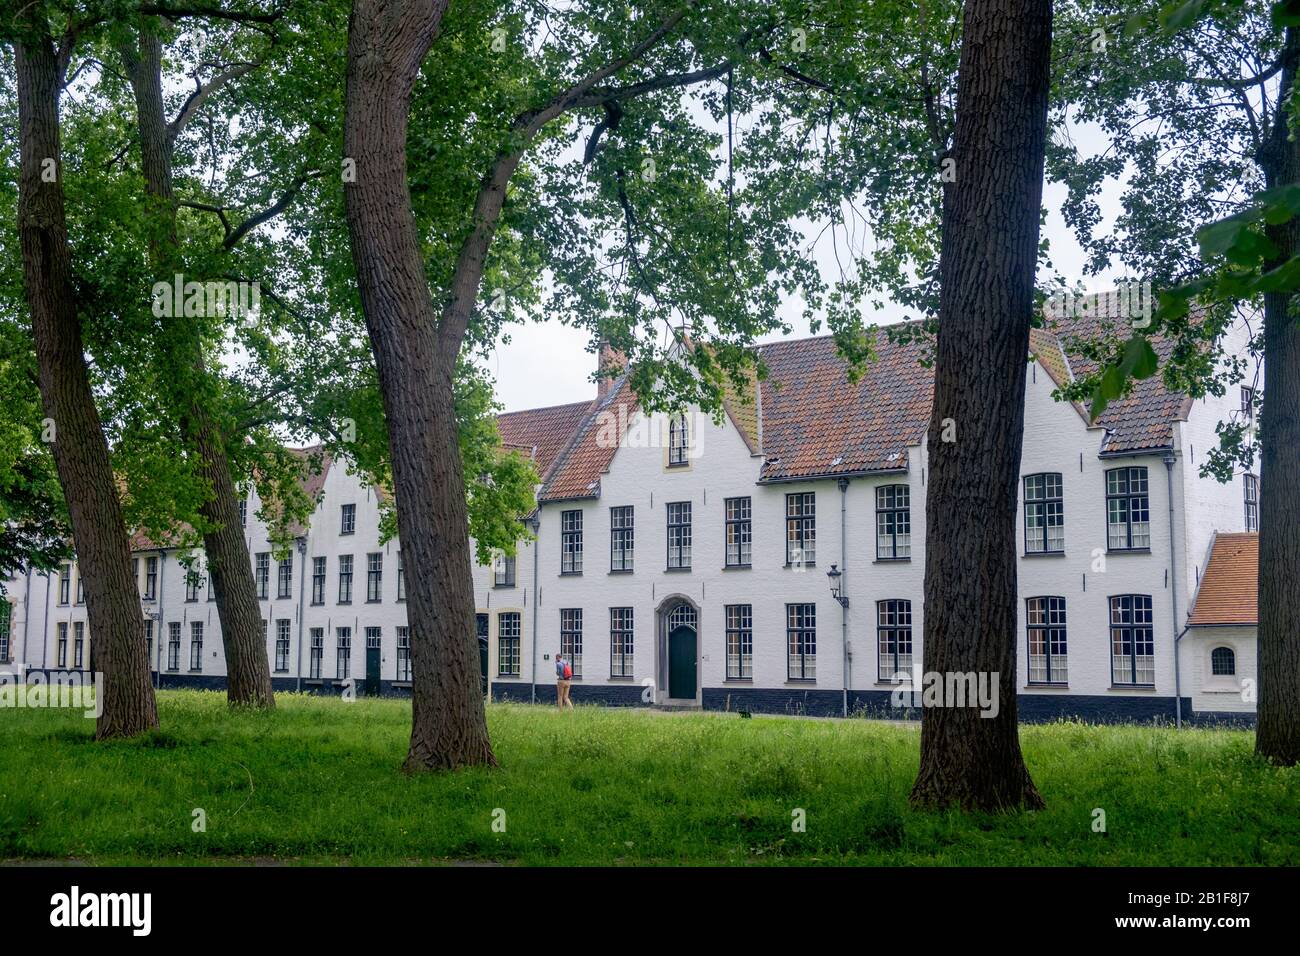 The beguinage of Bruges is a peaceful spot in the city center of Bruges. A row of white painted houses stands along a garden with trees. Stock Photo